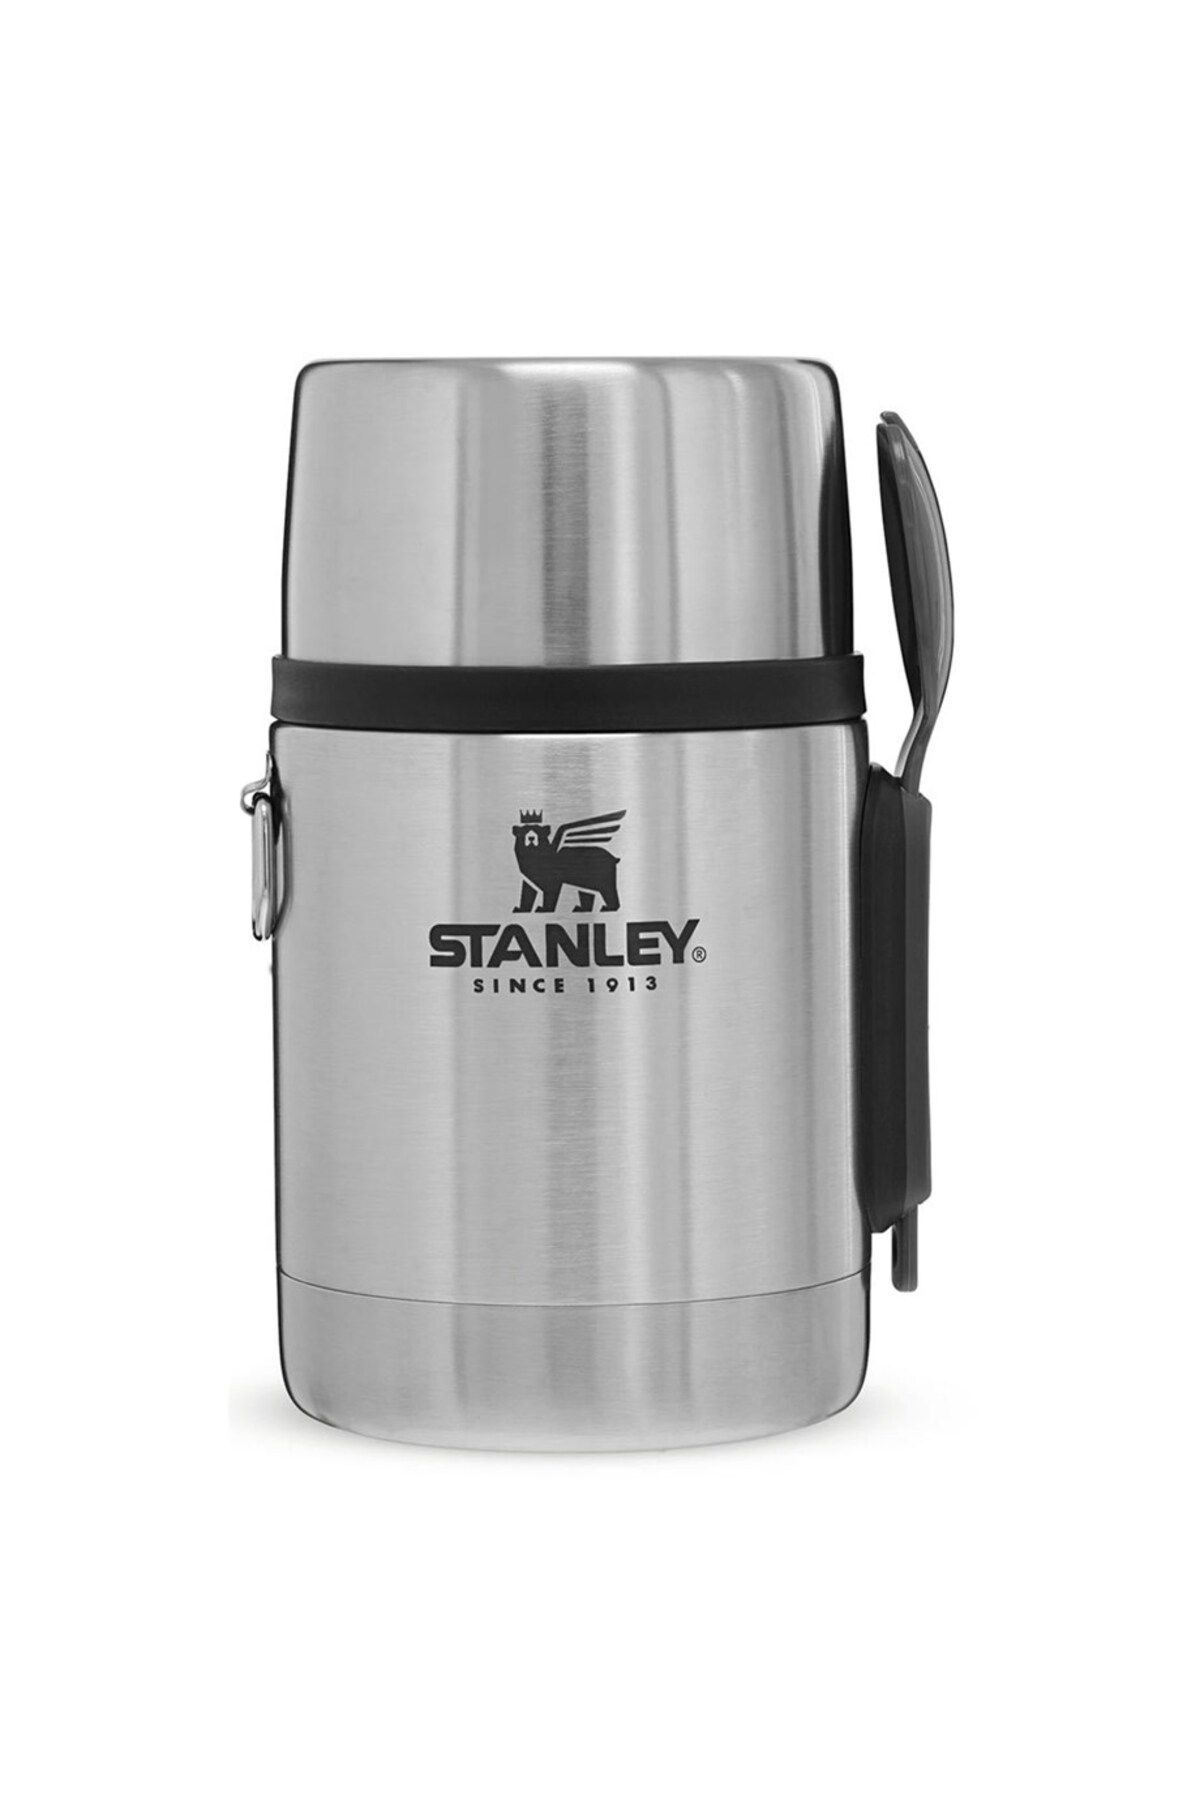 Stanley 10-01287-032 Stainless Steel